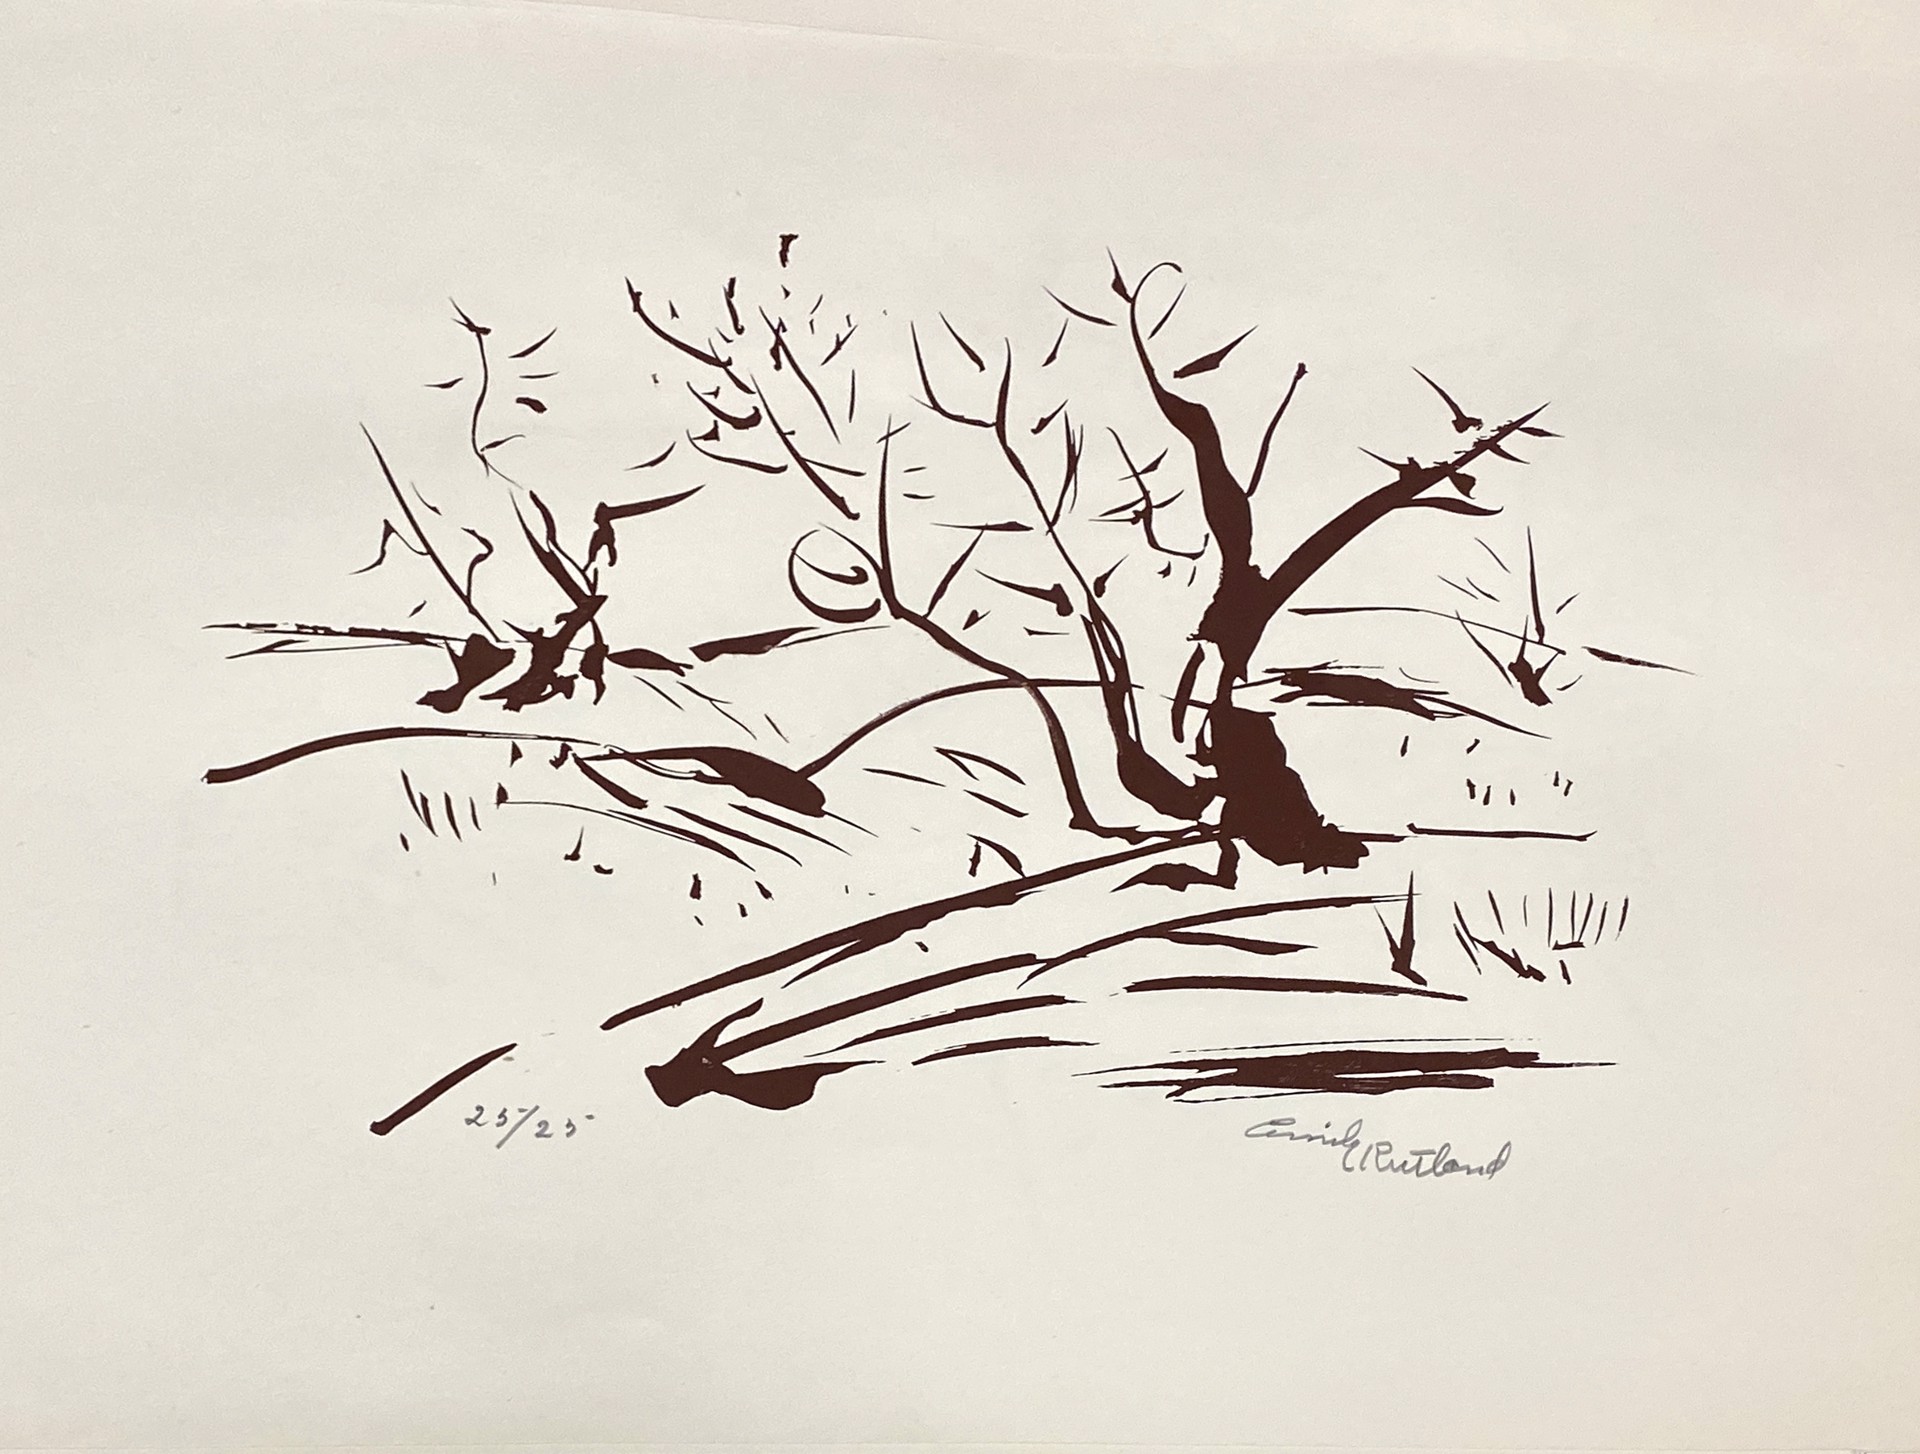 Trees in a Landscape, Ed. 25/25 by Emily Rutland